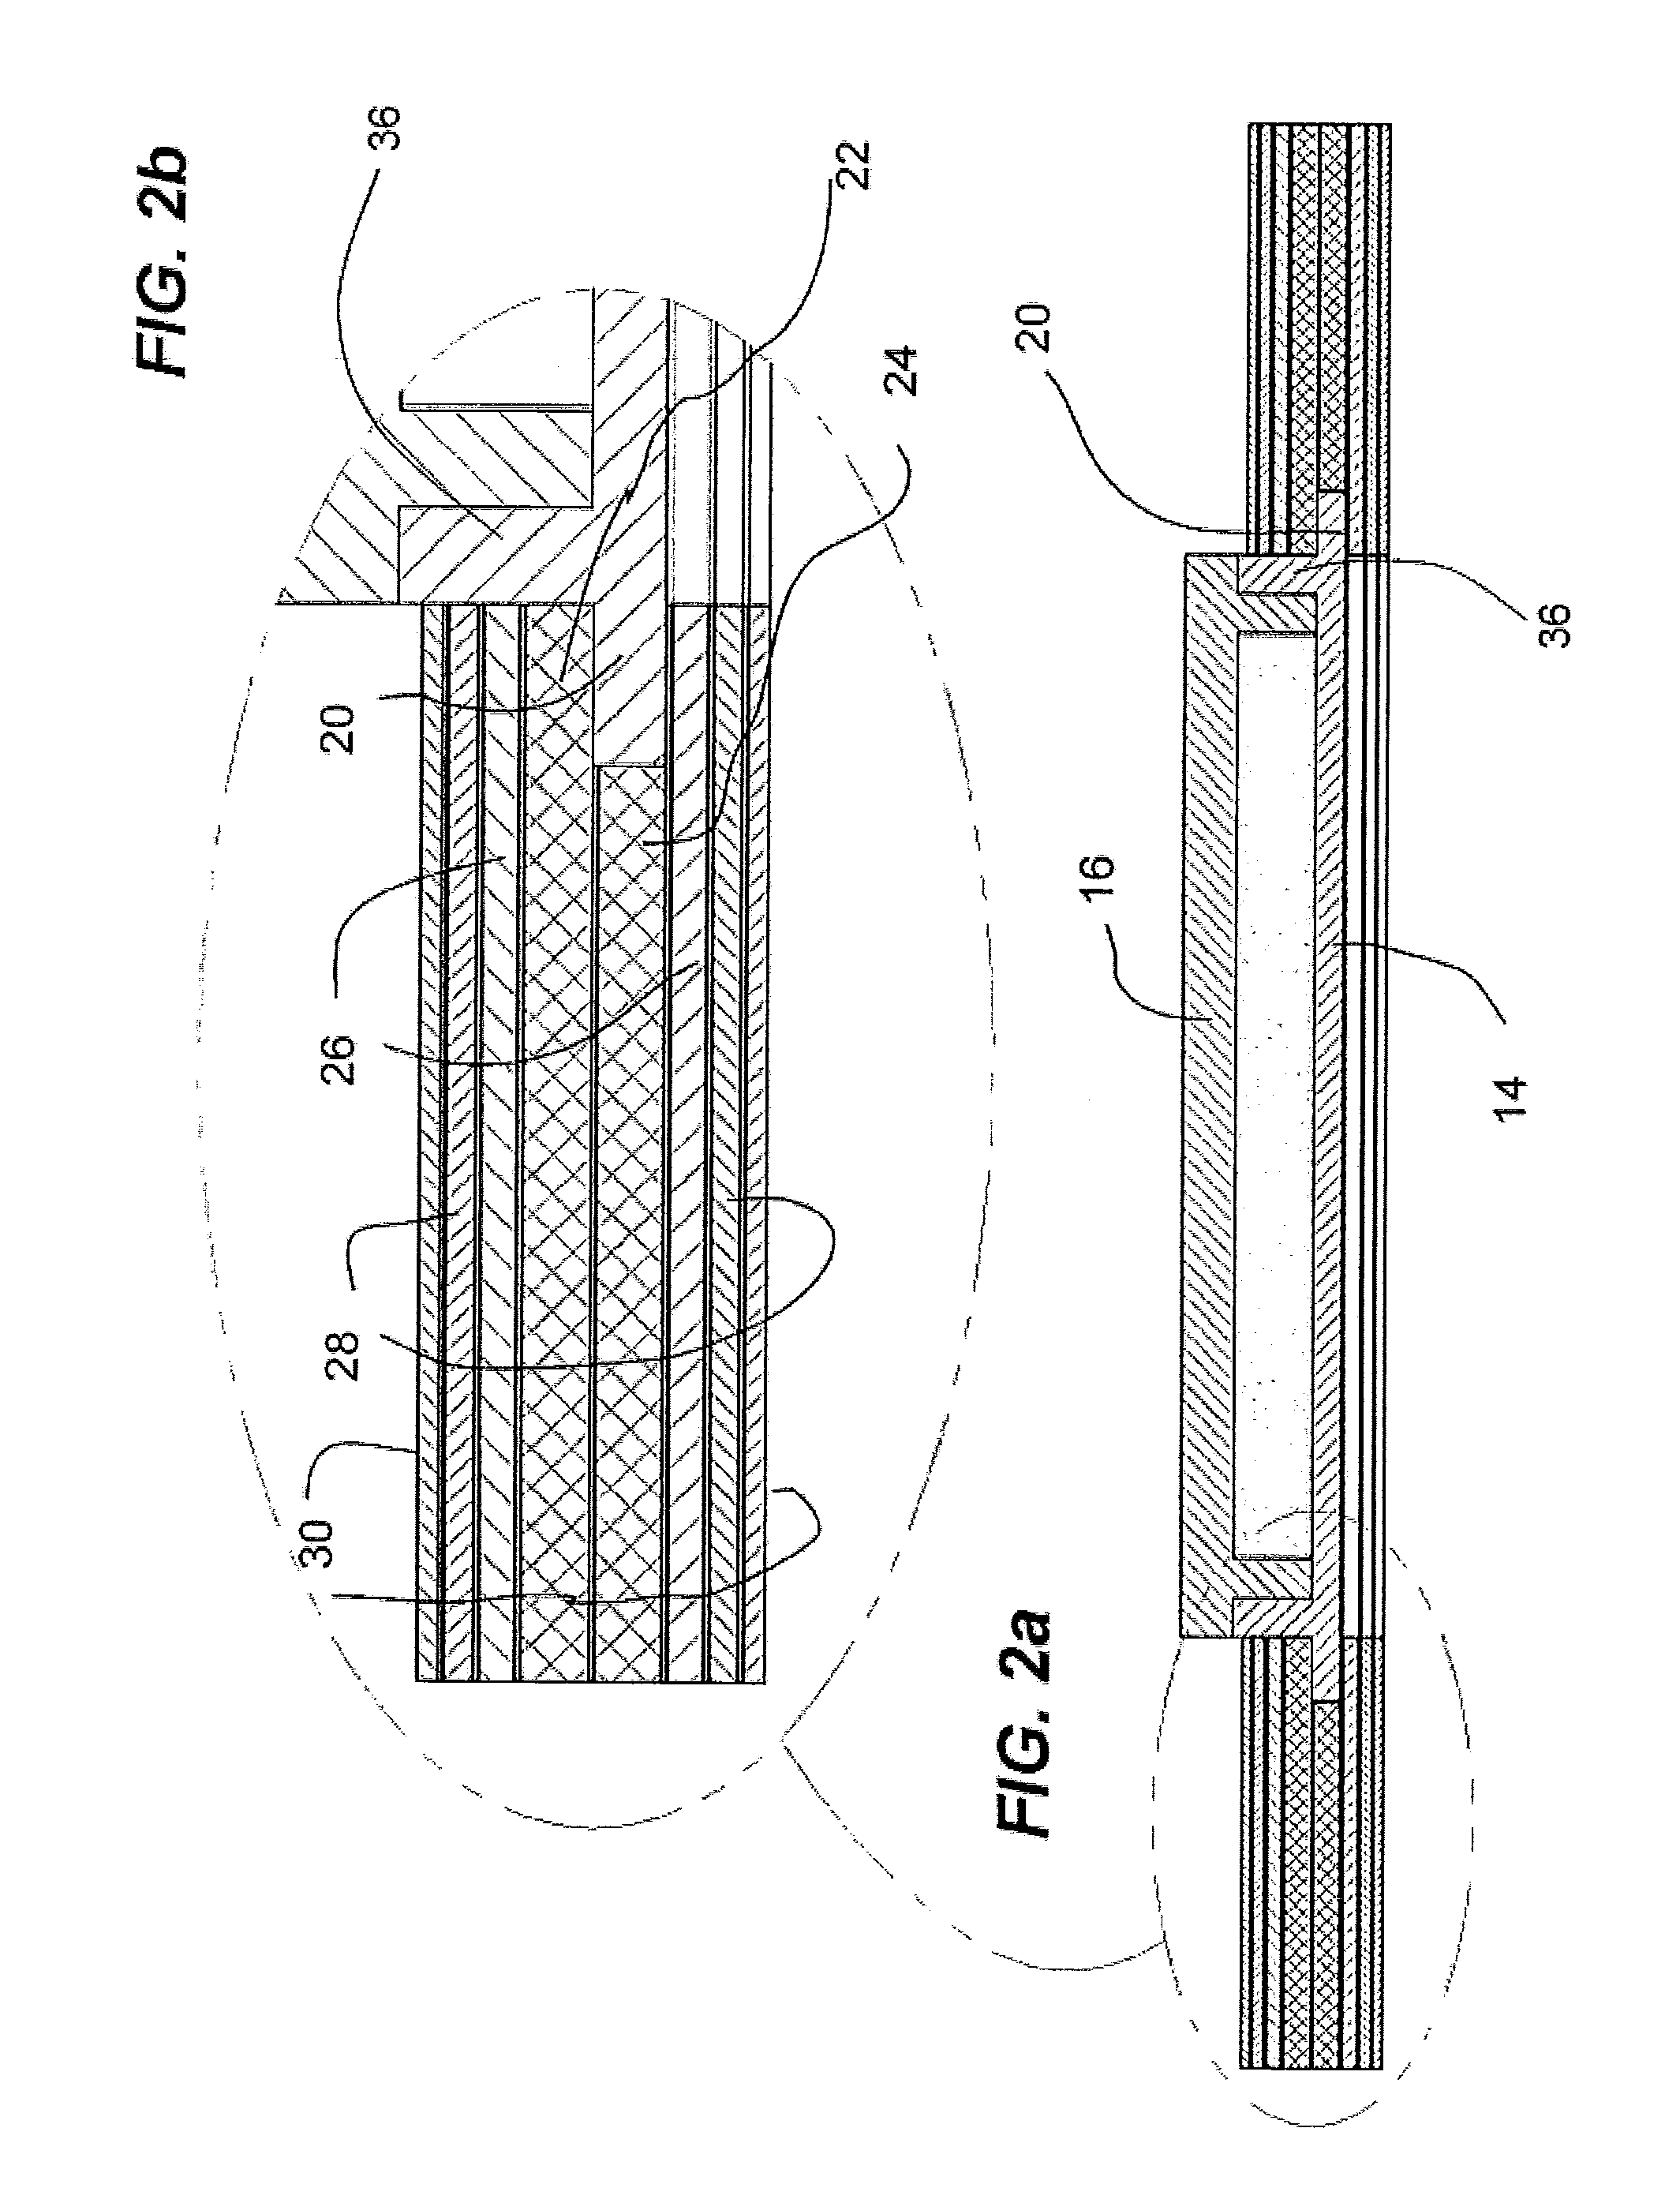 Resealable packaging device and method for packaging collectible items